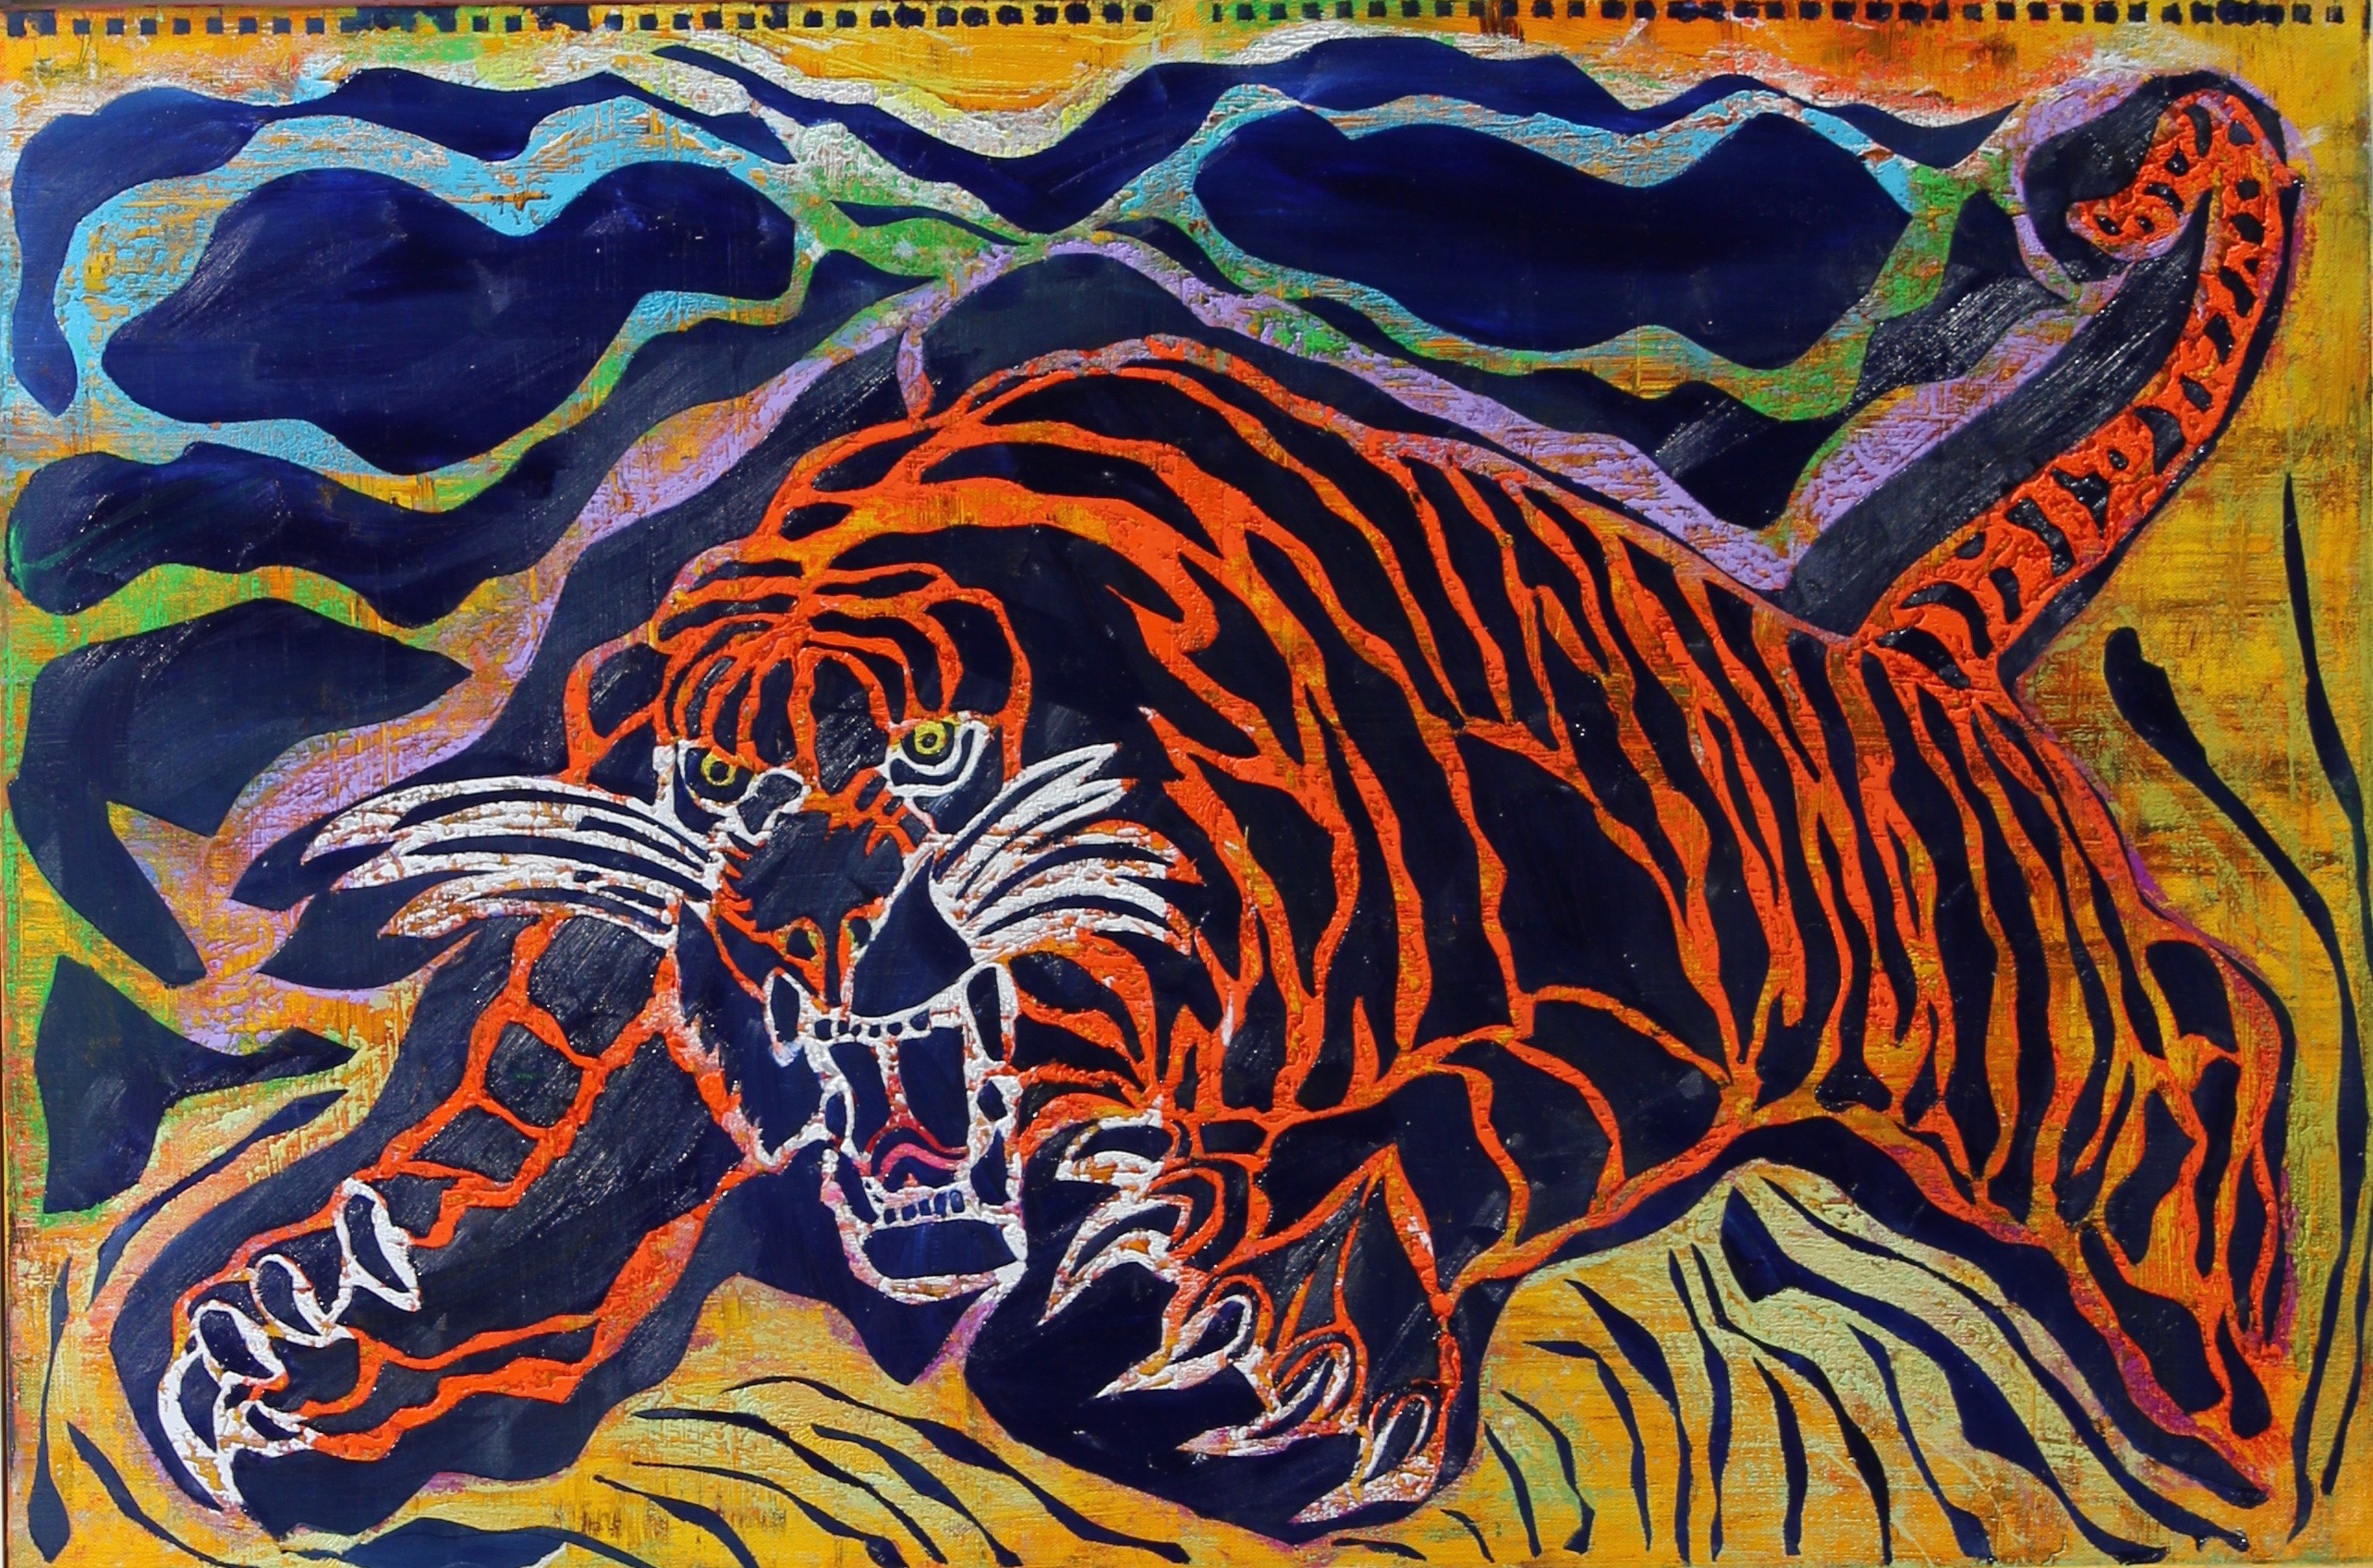 Tiger Attack Blue by Stephen Clegg at www.cleggart.com